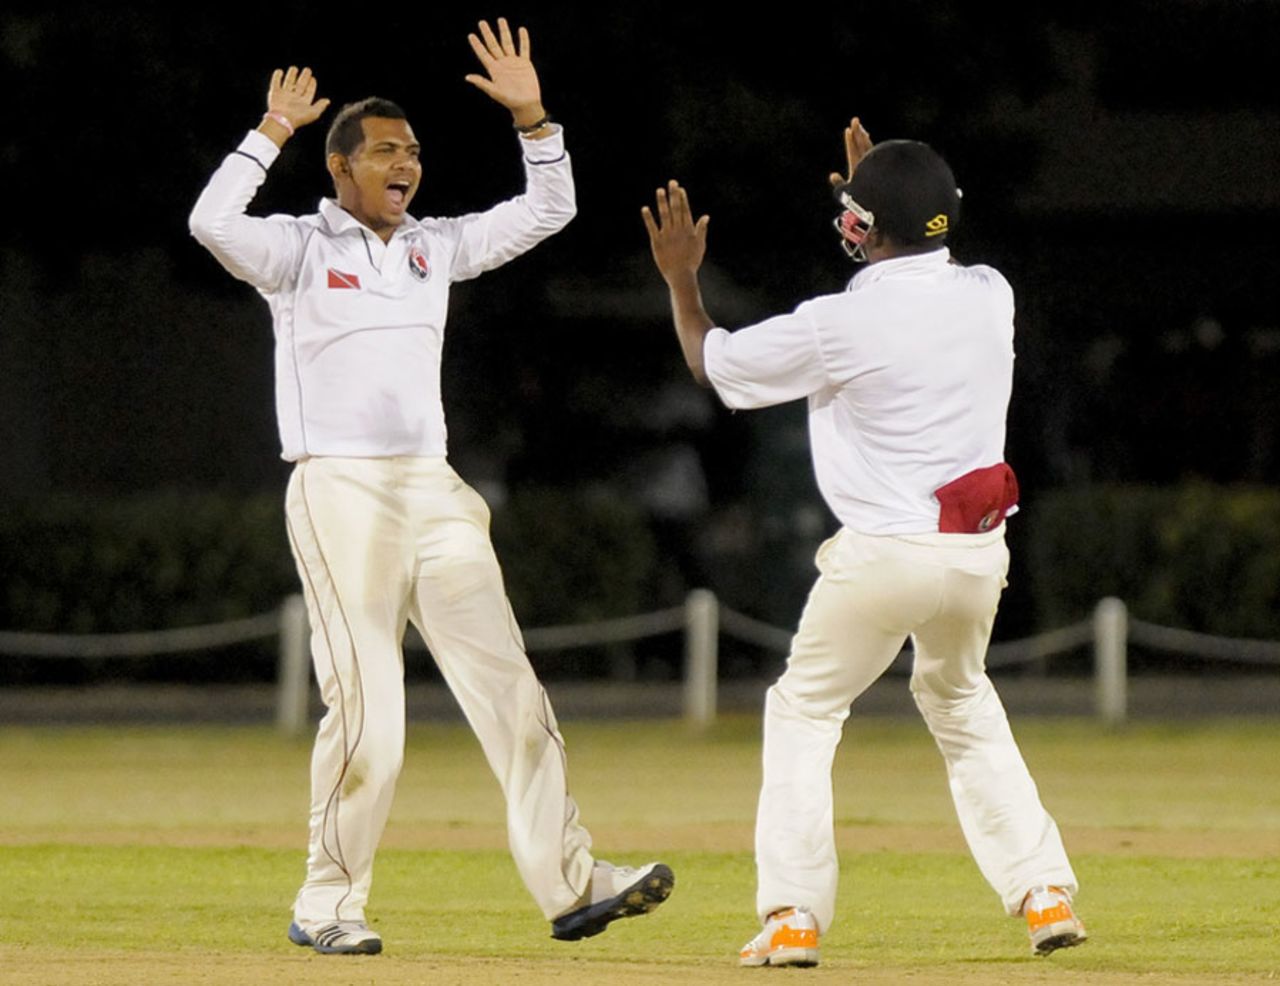 Sunil Narine picked up 13 wickets in the match, Combined Campuses and Colleges v Trinidad & Tobago, Day 2, Bridgetown, Regional Four Day competition, February 4, 2012